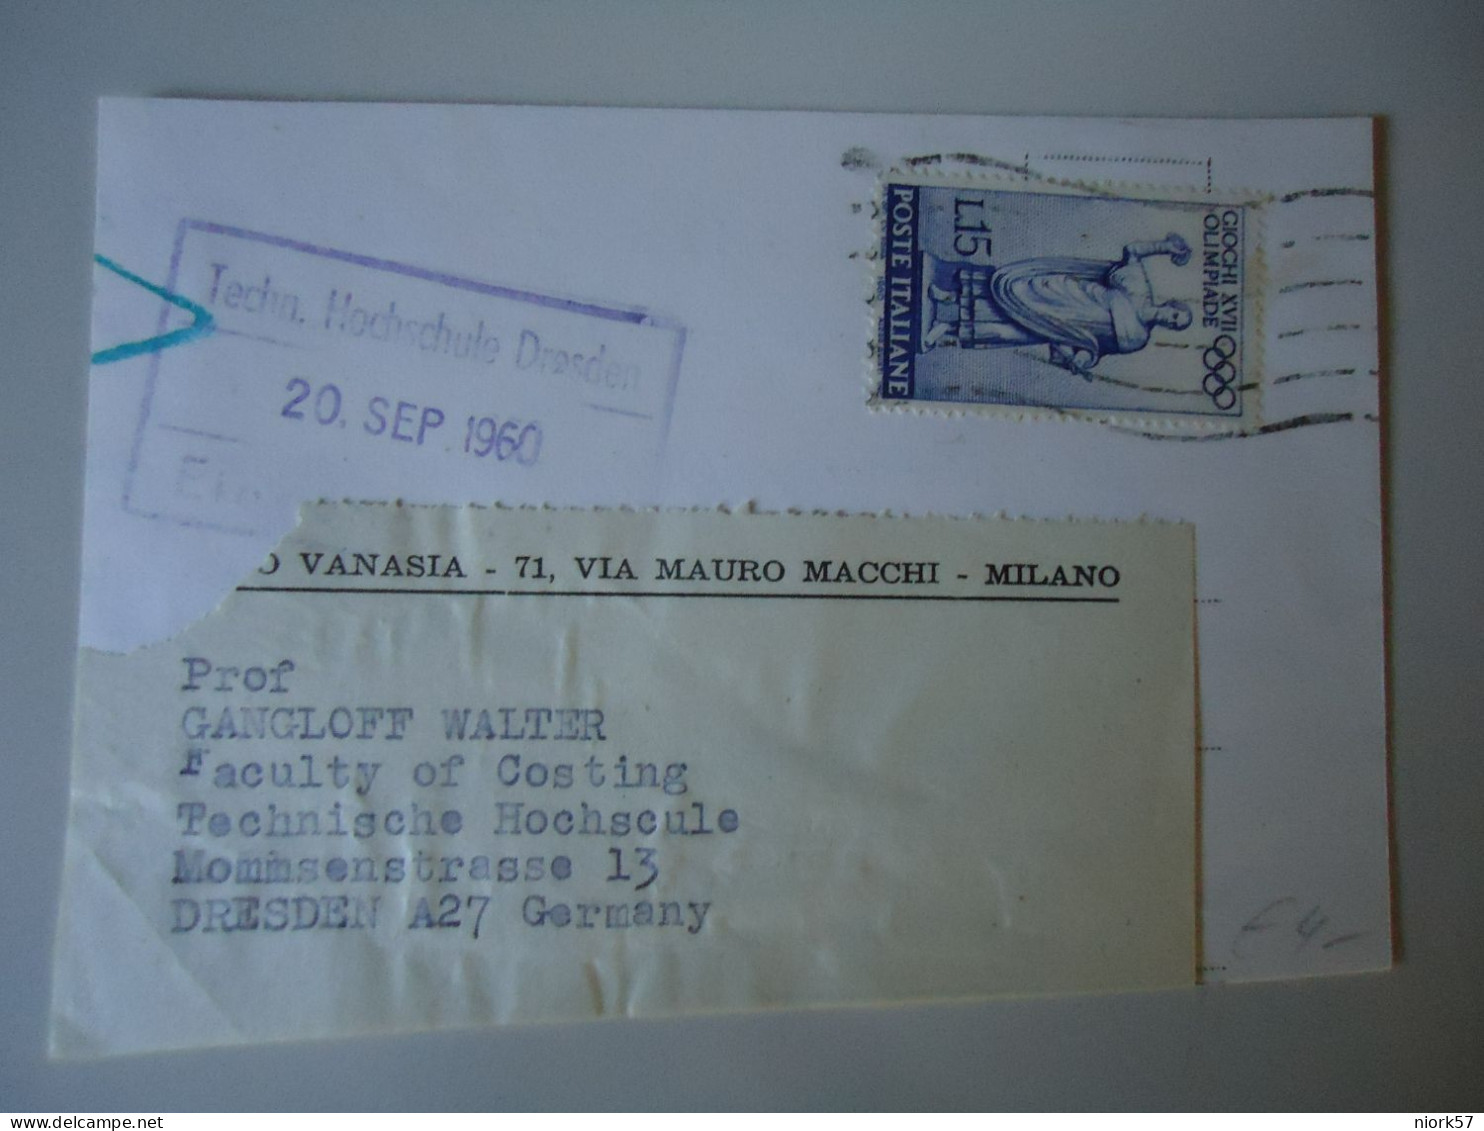 ITALY UNOFFICIAL POSTAL  CARDS OLYMPIC GAMES ROMA 1960 POSTED DRESDEN - Sommer 1960: Rom